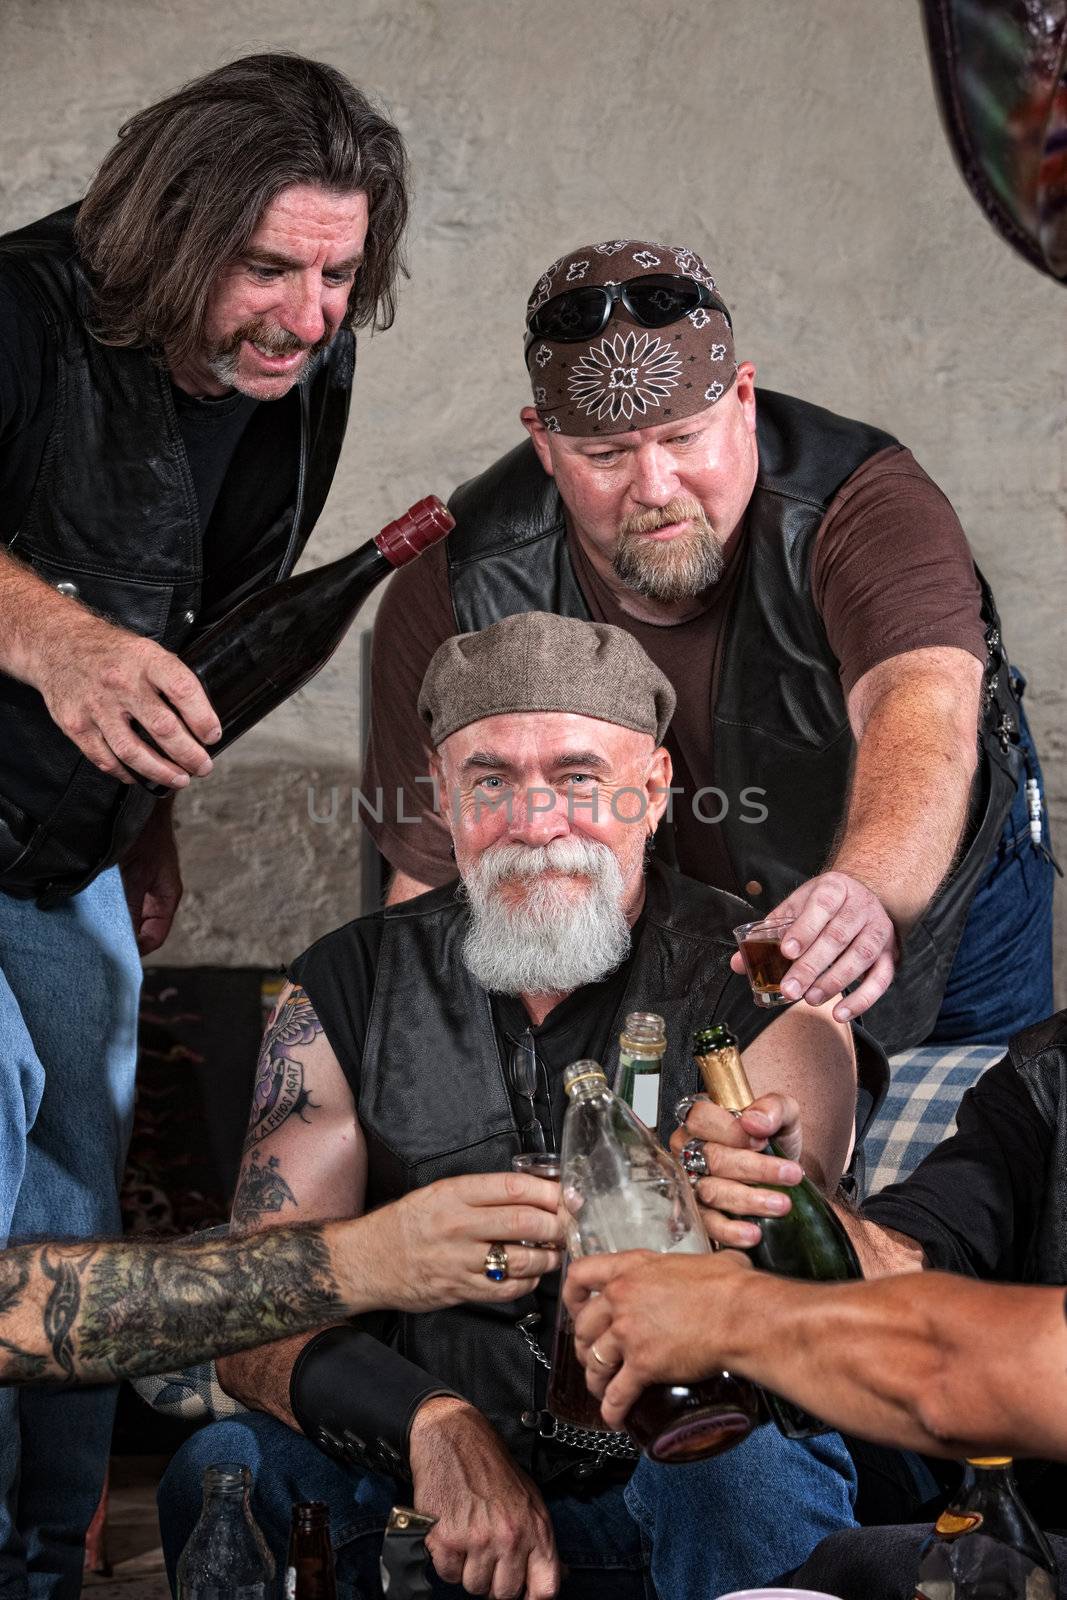 Smiling gang members toasting with bottle of liquor